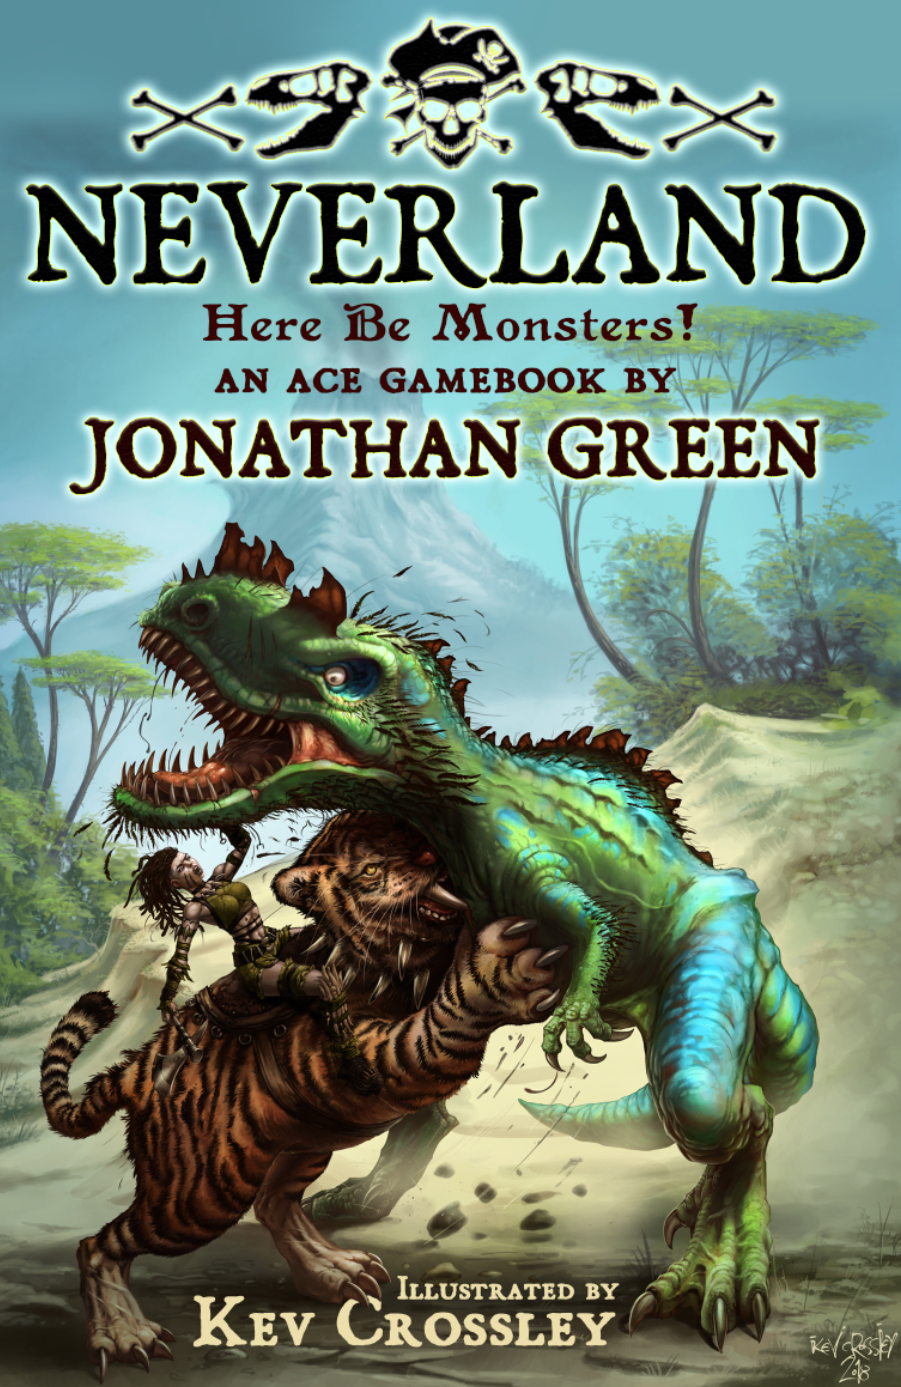 NEVERLAND - Here Be Monsters!